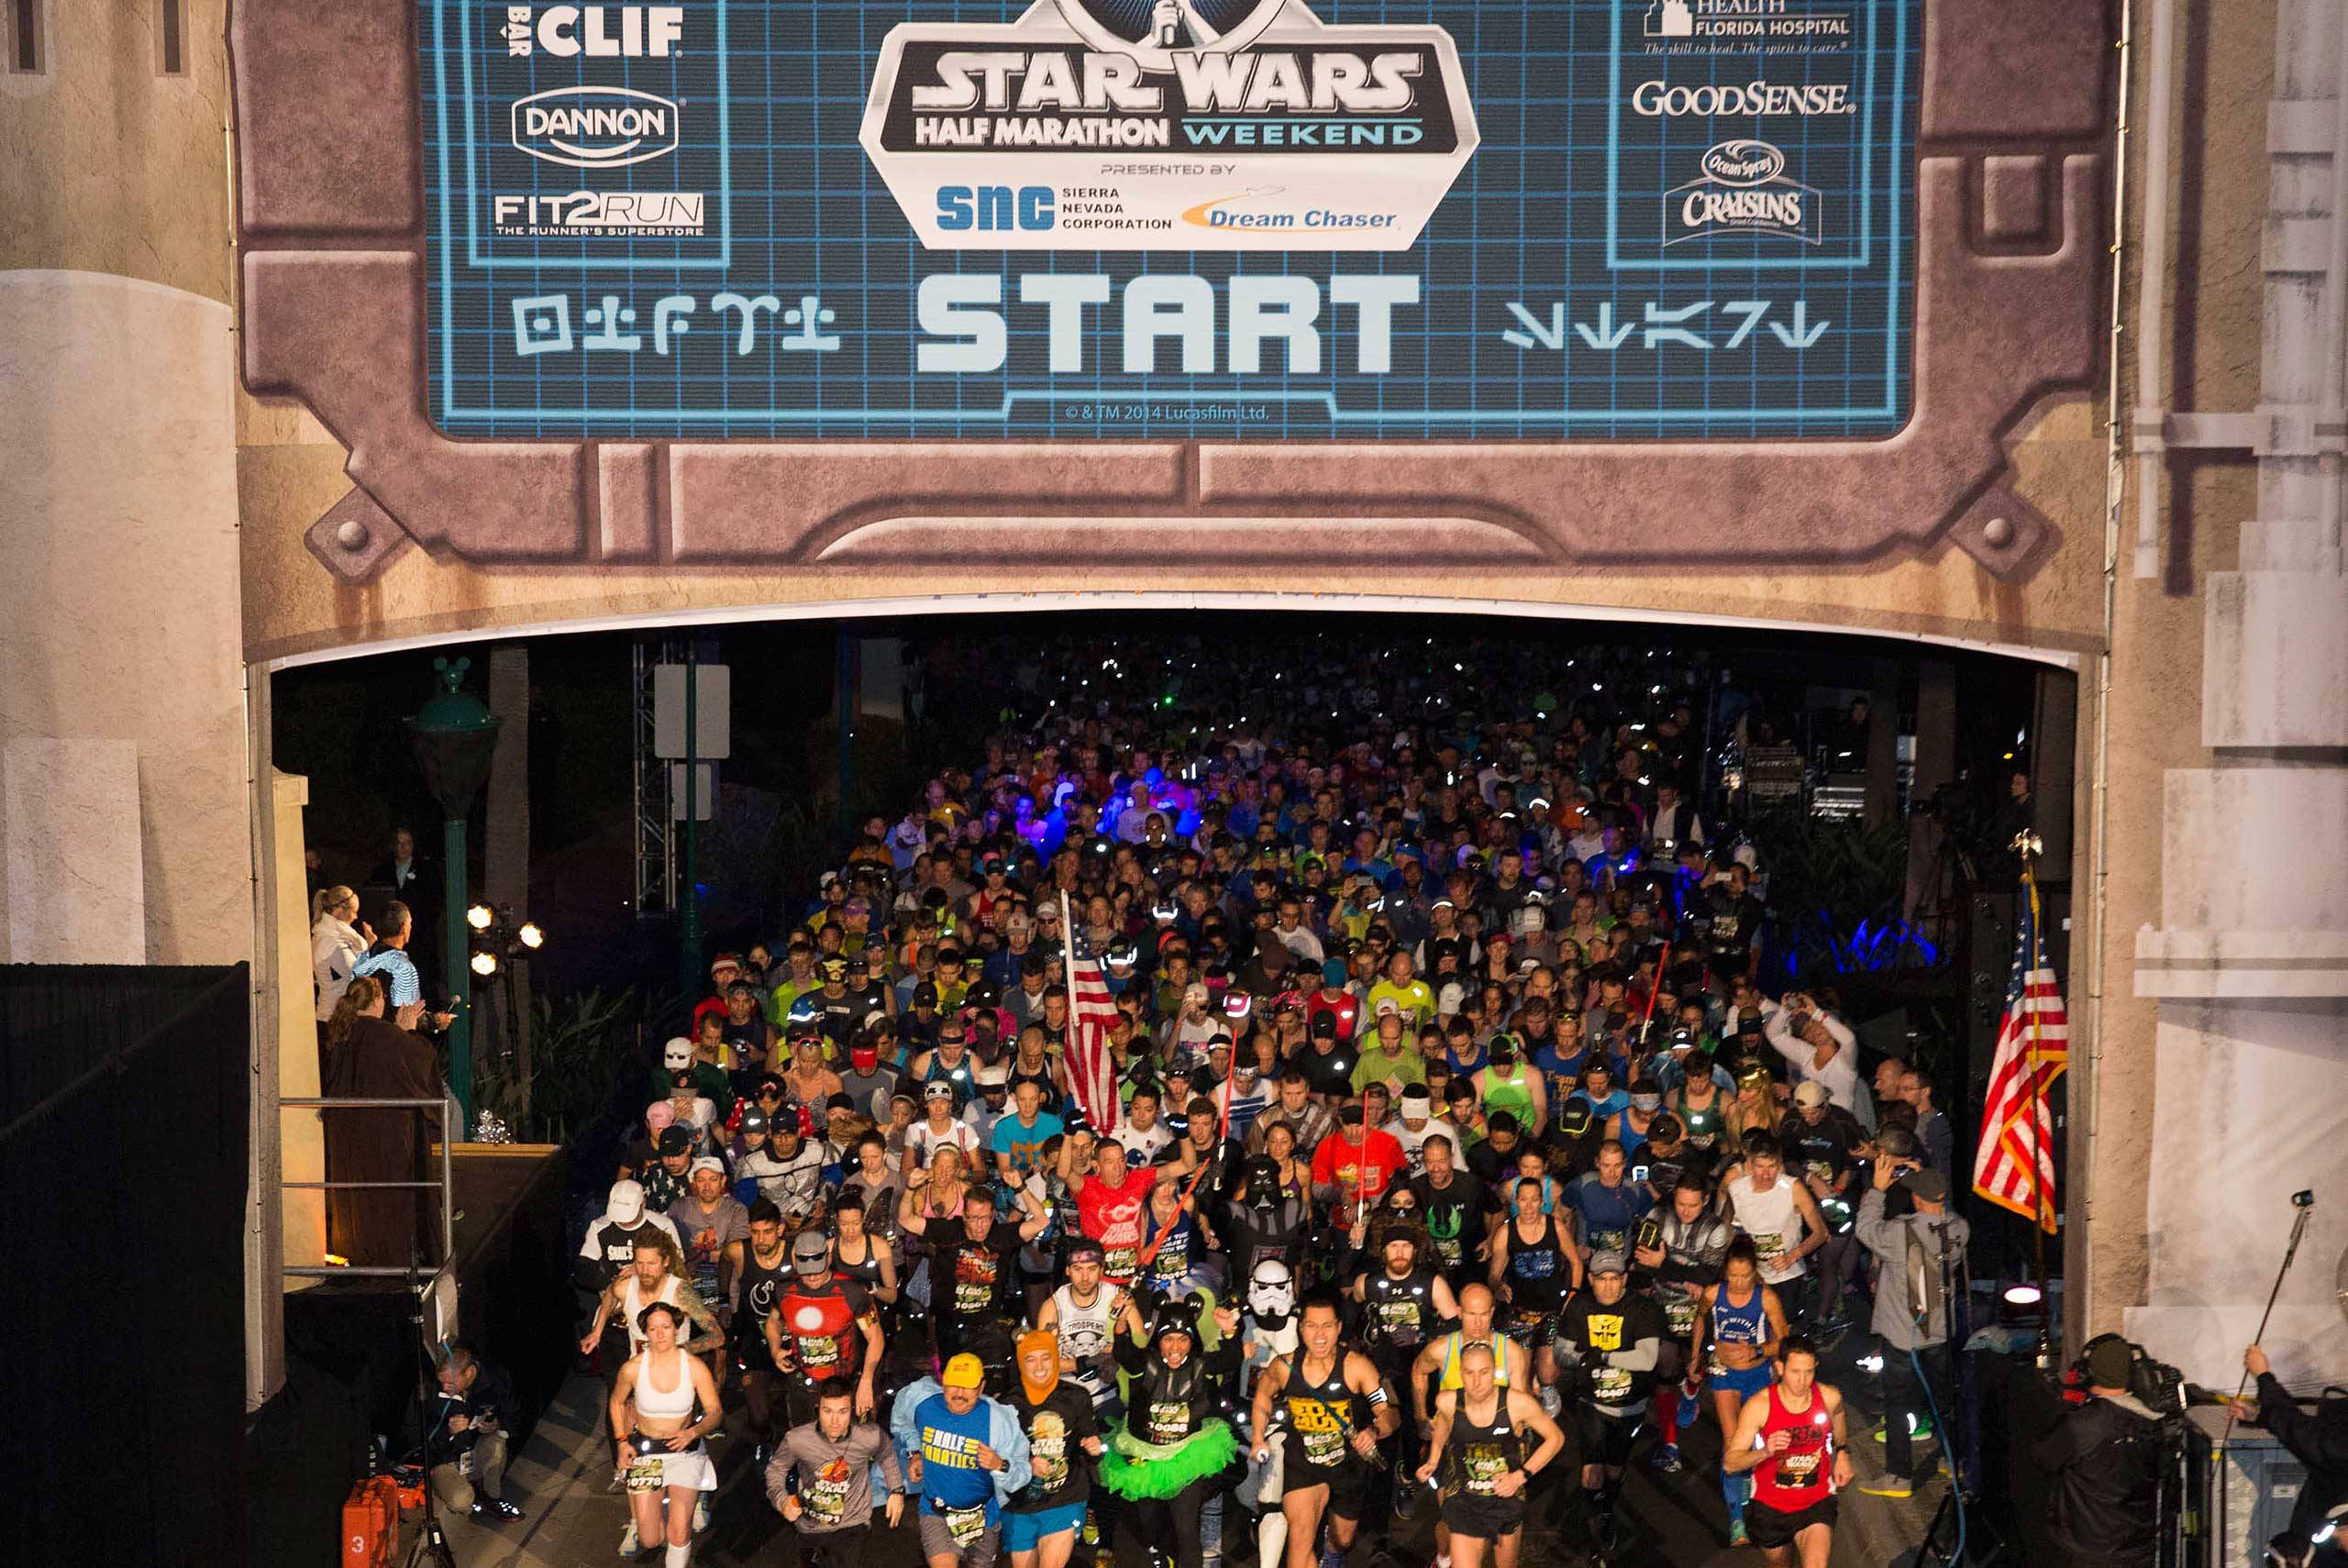 New runDisney Star Wars race name and theme coming in 2019 - Star Wars Rival Run Weekend